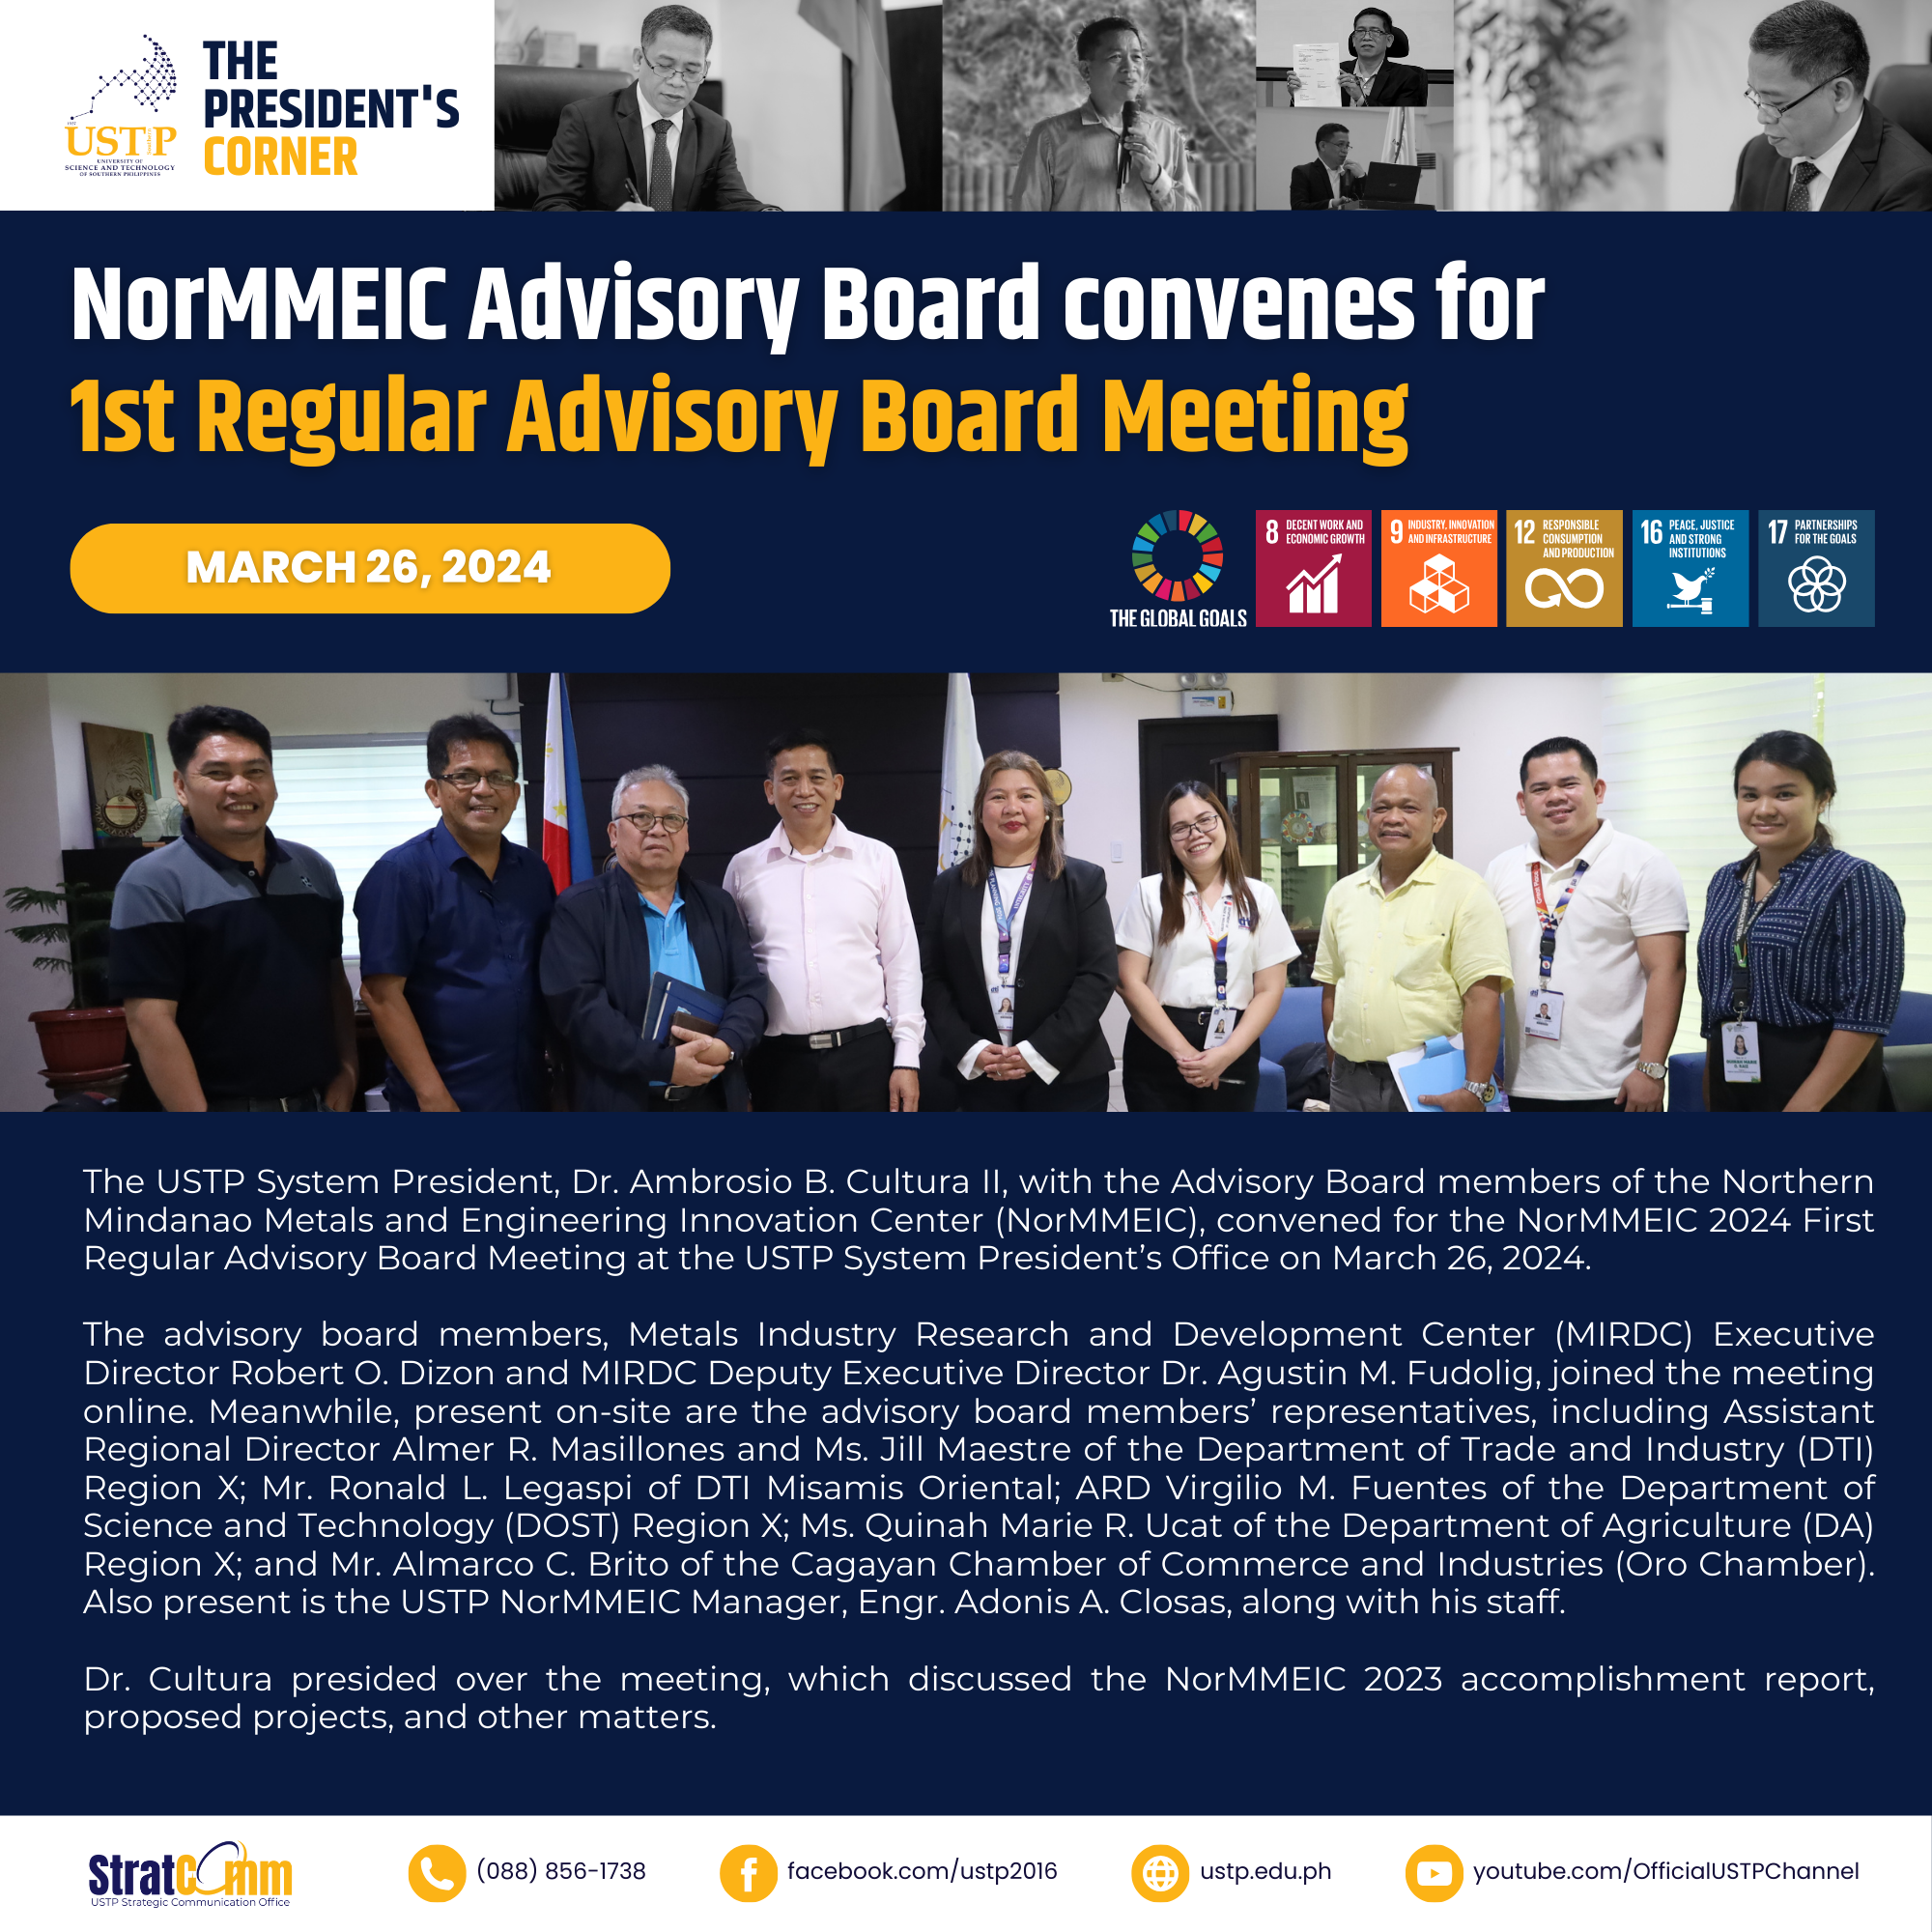 NorMMEIC Advisory Board convenes for 1st Regular Advisory Board Meeting